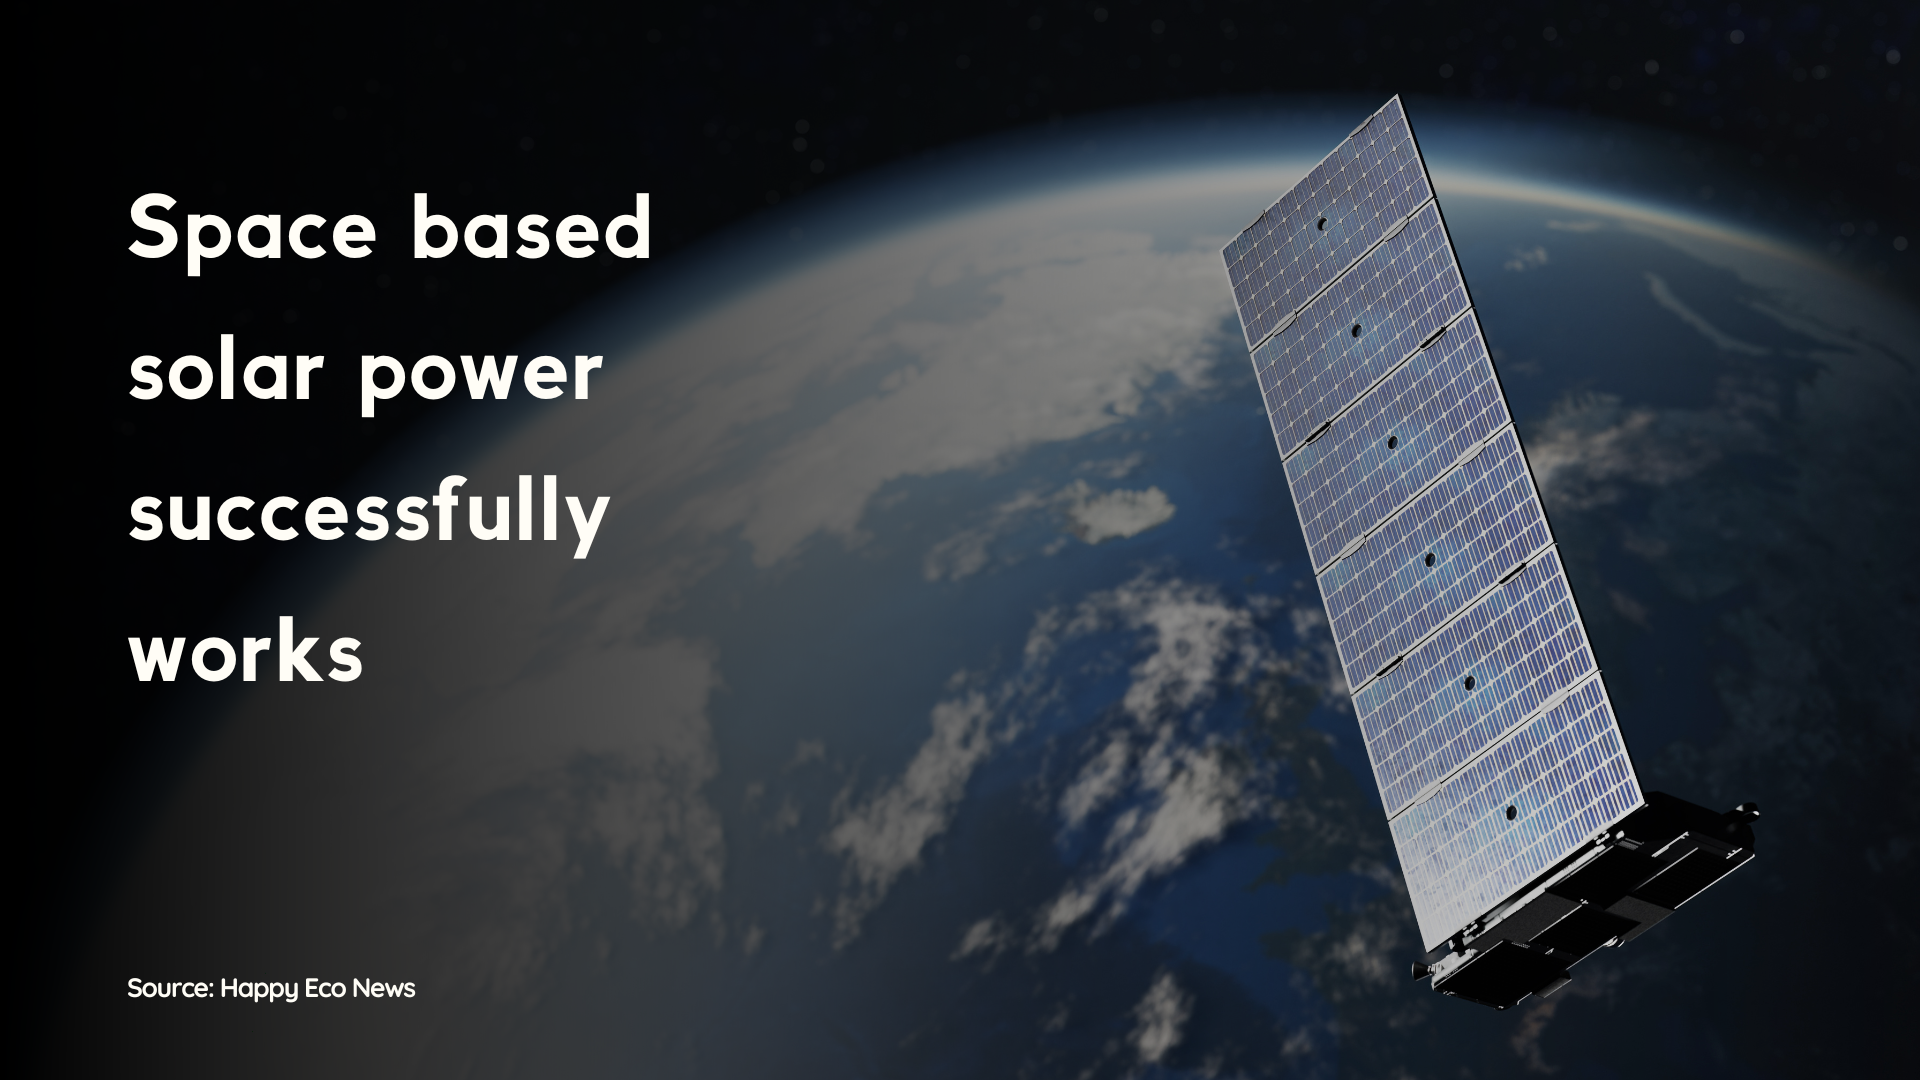 Space based solar power successfully works